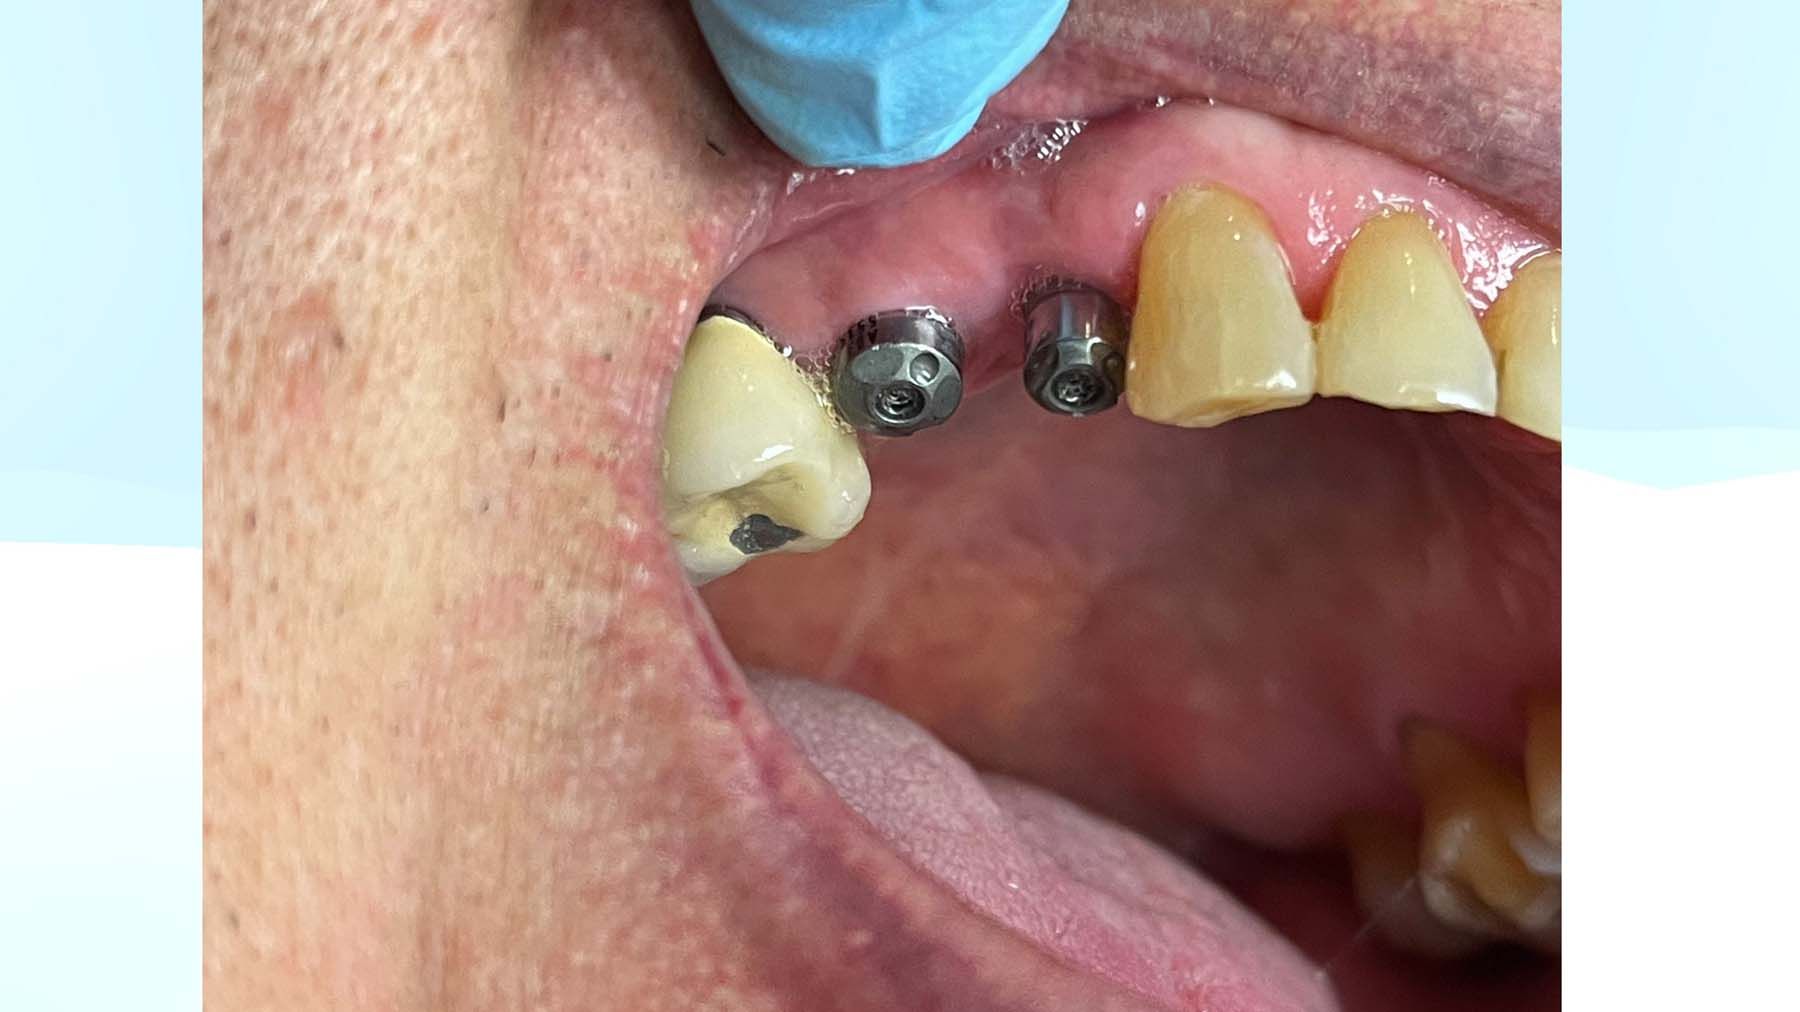 Figure 7. The healing abutment implant site #4 and #5